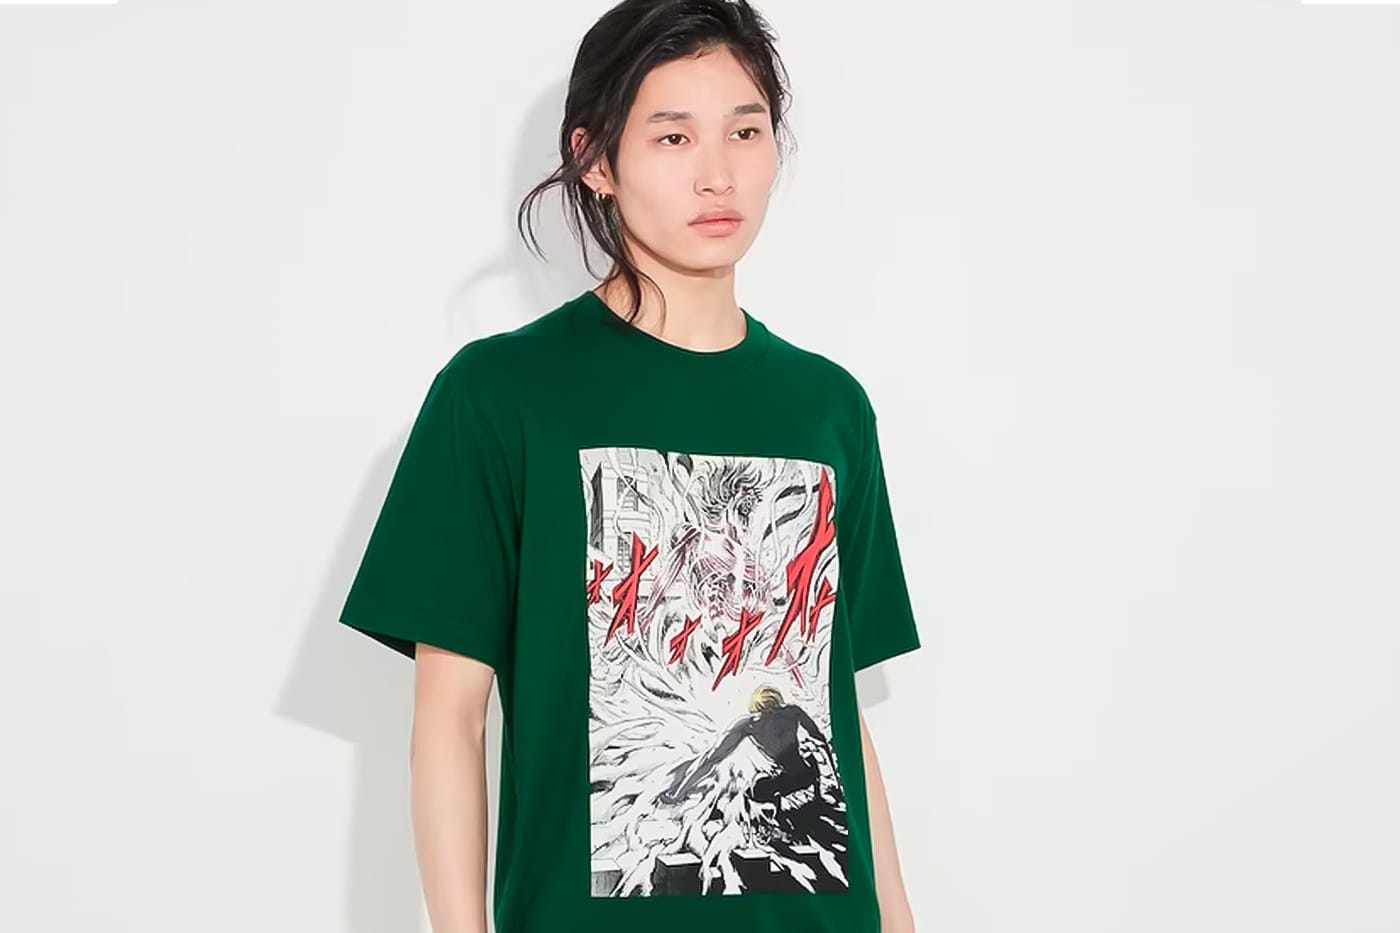 Attack on Titan x Uniqlo pairing unleashes a colossal collaboration on the  world  SoraNews24 Japan News